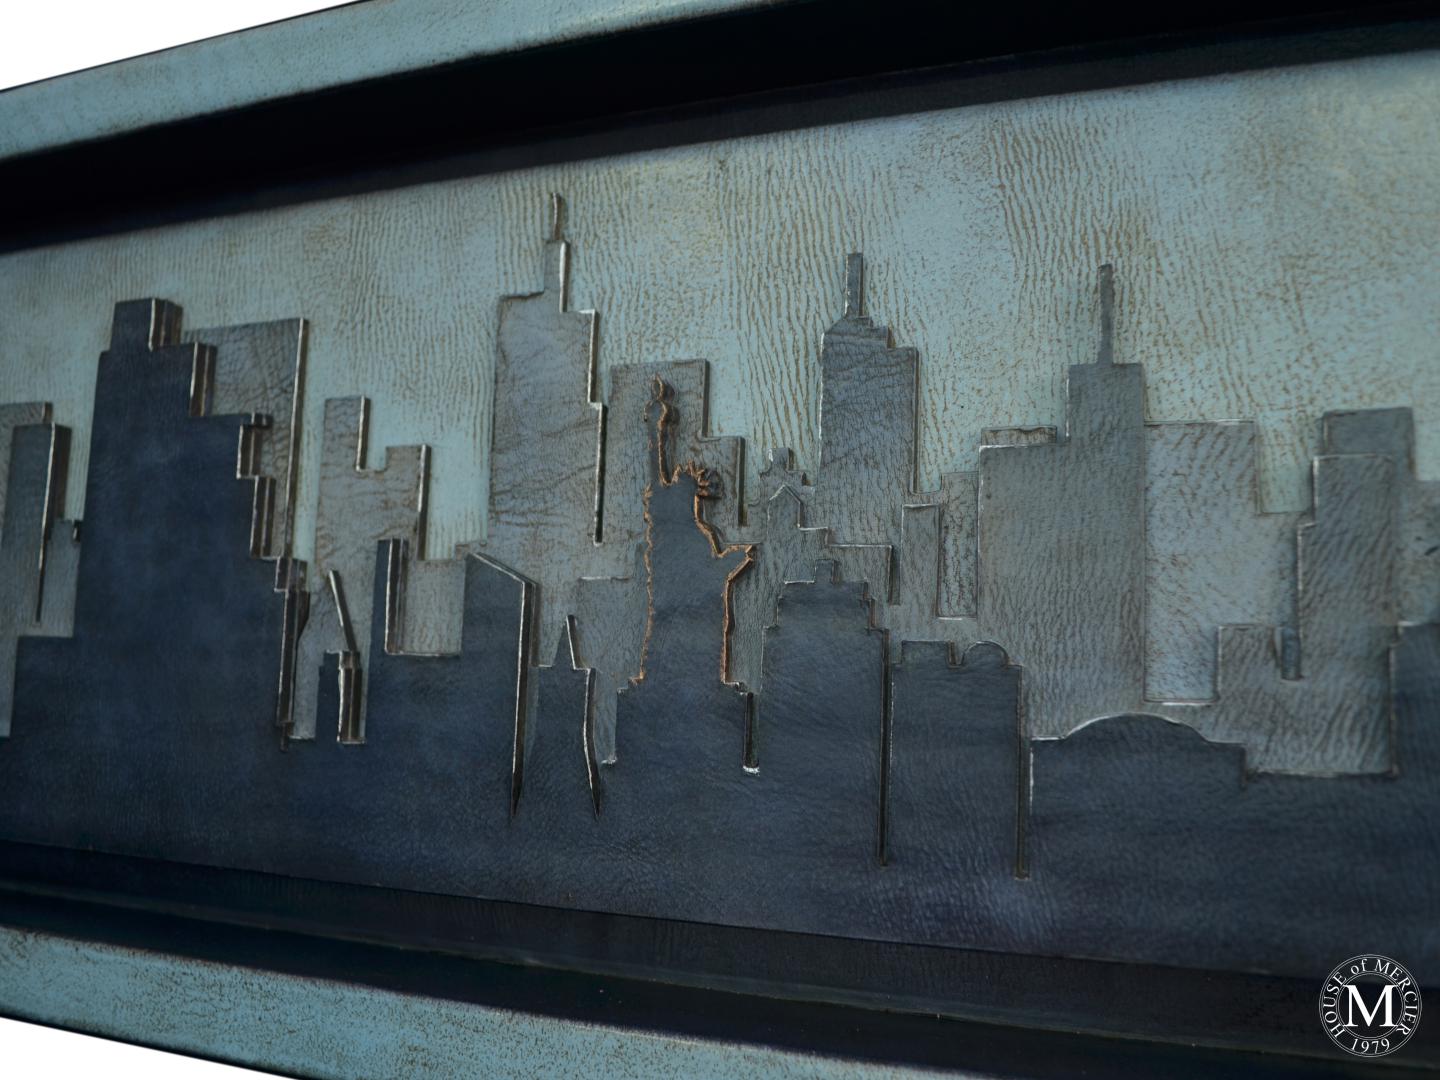 New York Silhouette, Leather Framed Panneux